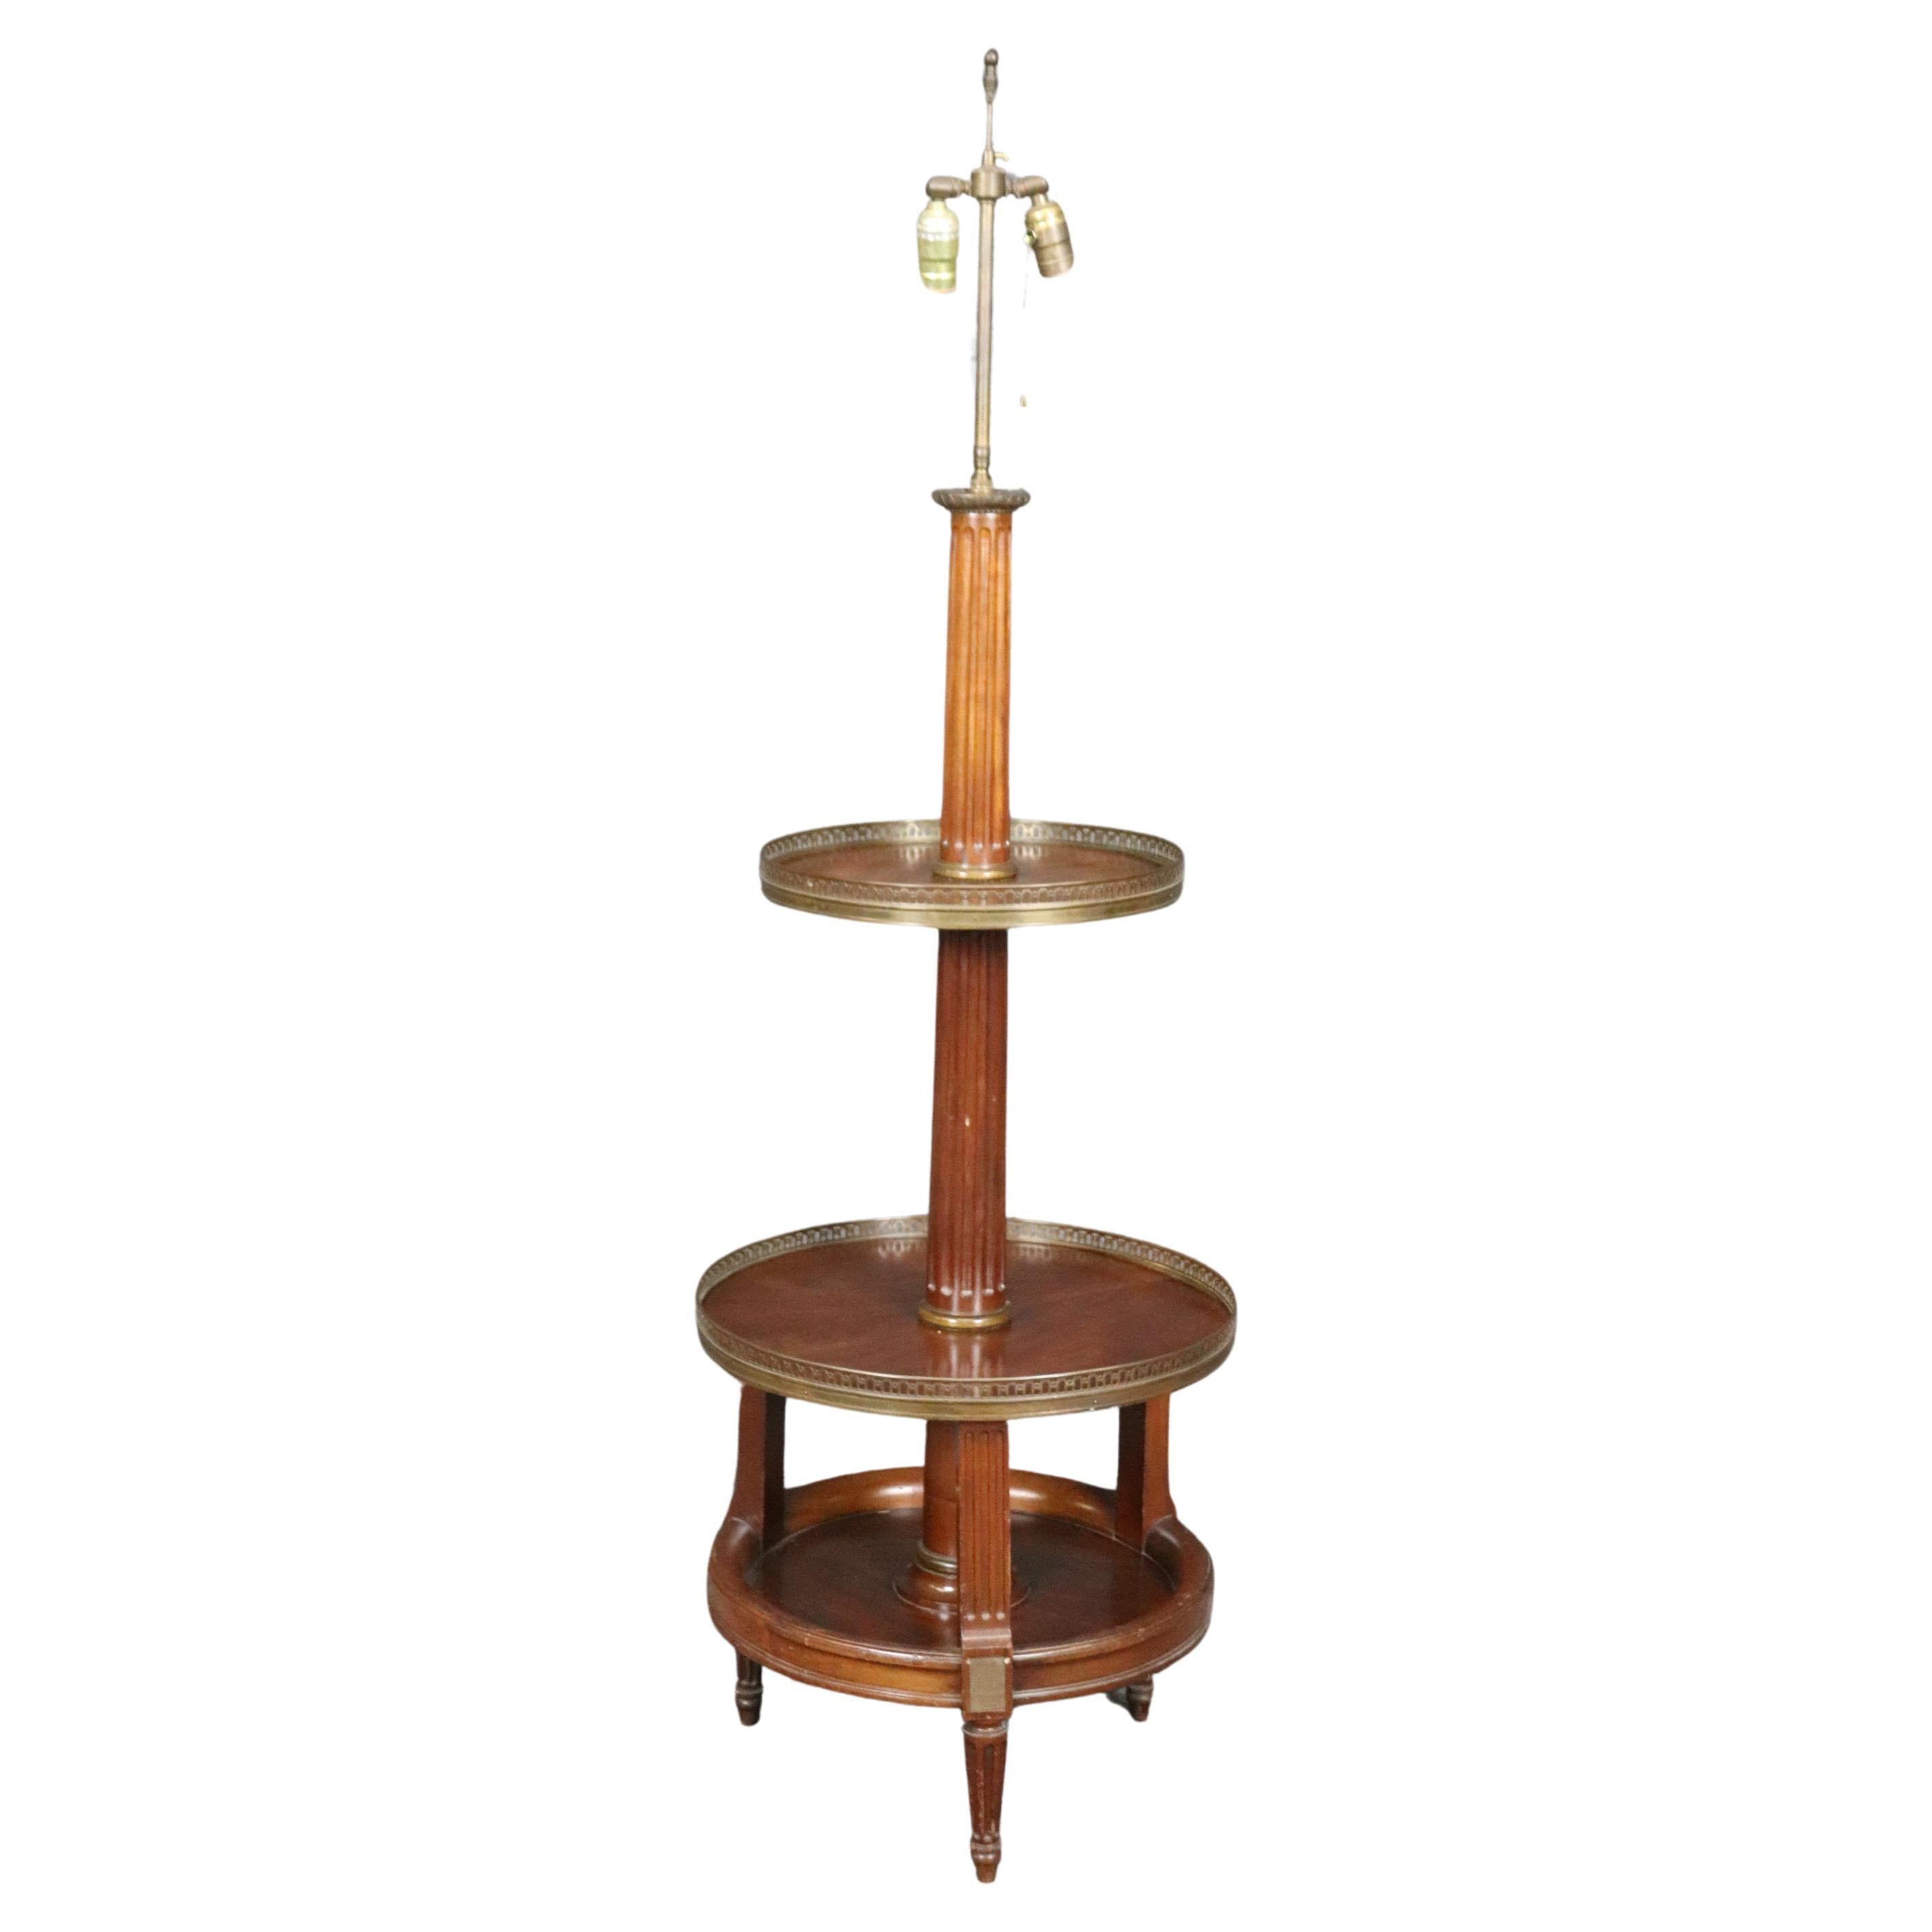 French Directoire Mahogany and Brass Mounted Floor Lamp with Shelves For Sale